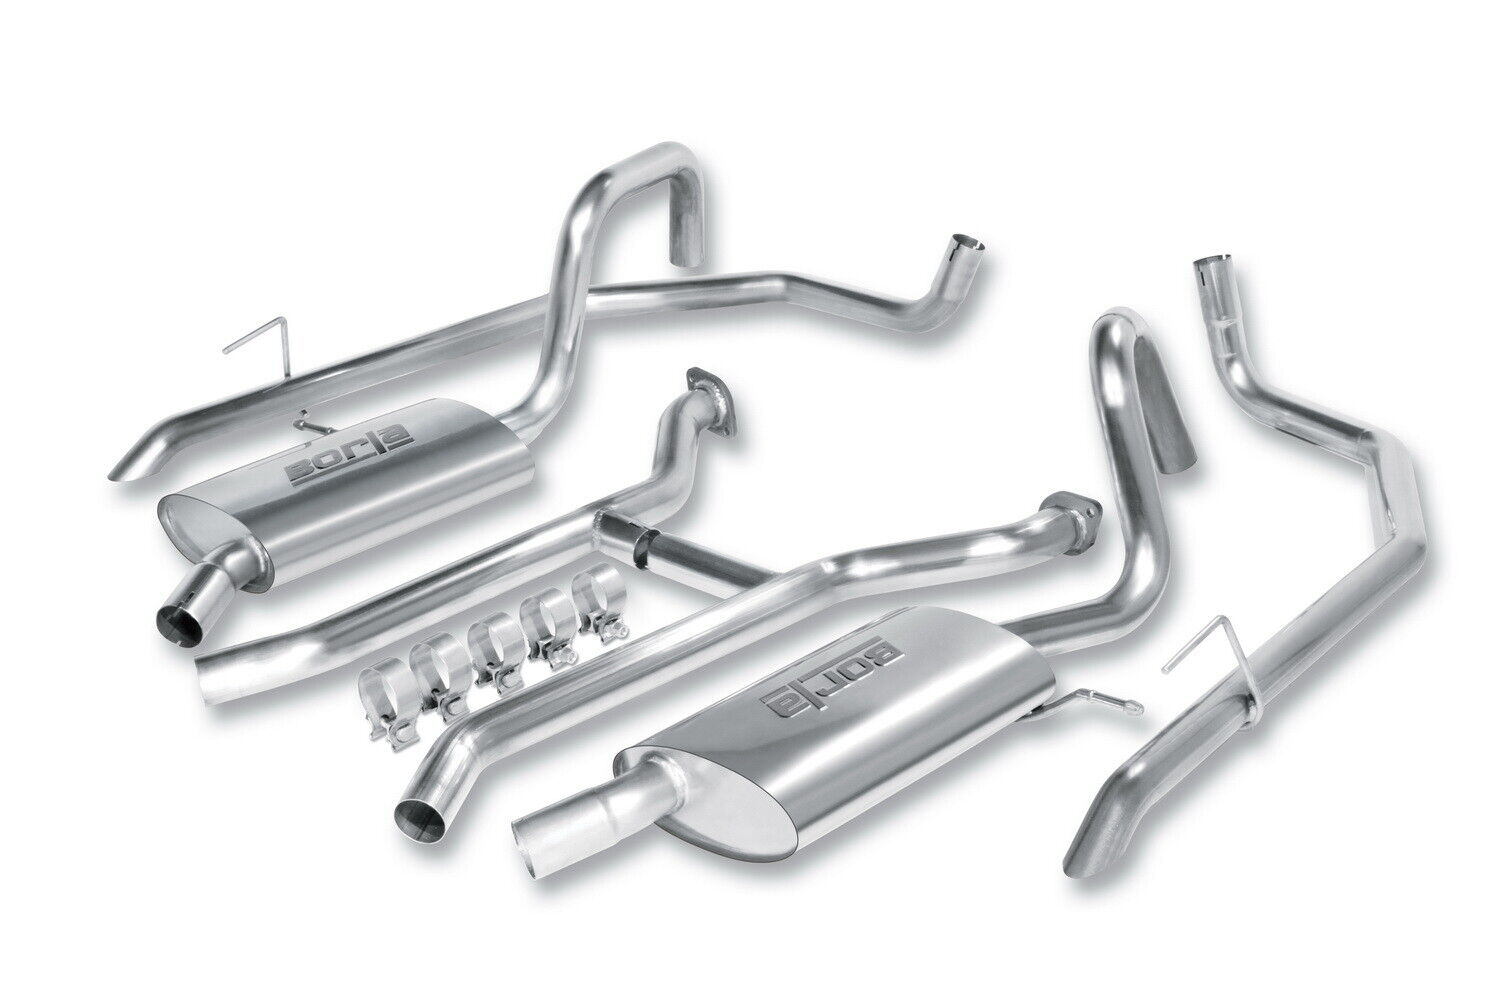 Borla 140360 Touring Cat-Back Exhaust System Fits 03-11 Crown Victoria